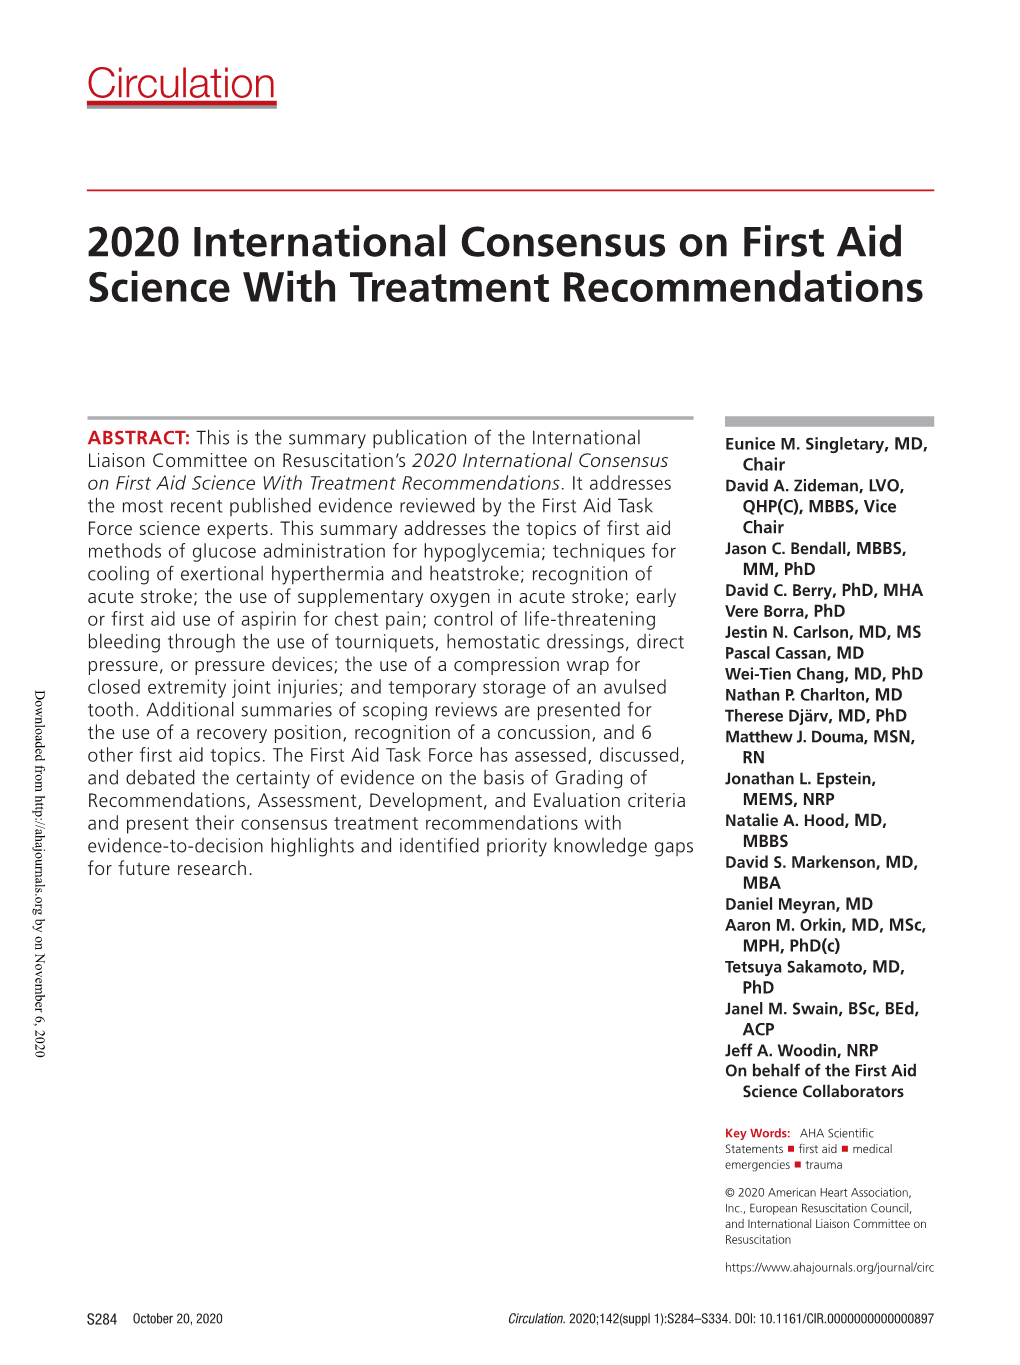 2020 International Consensus on First Aid Science with Treatment Recommendations